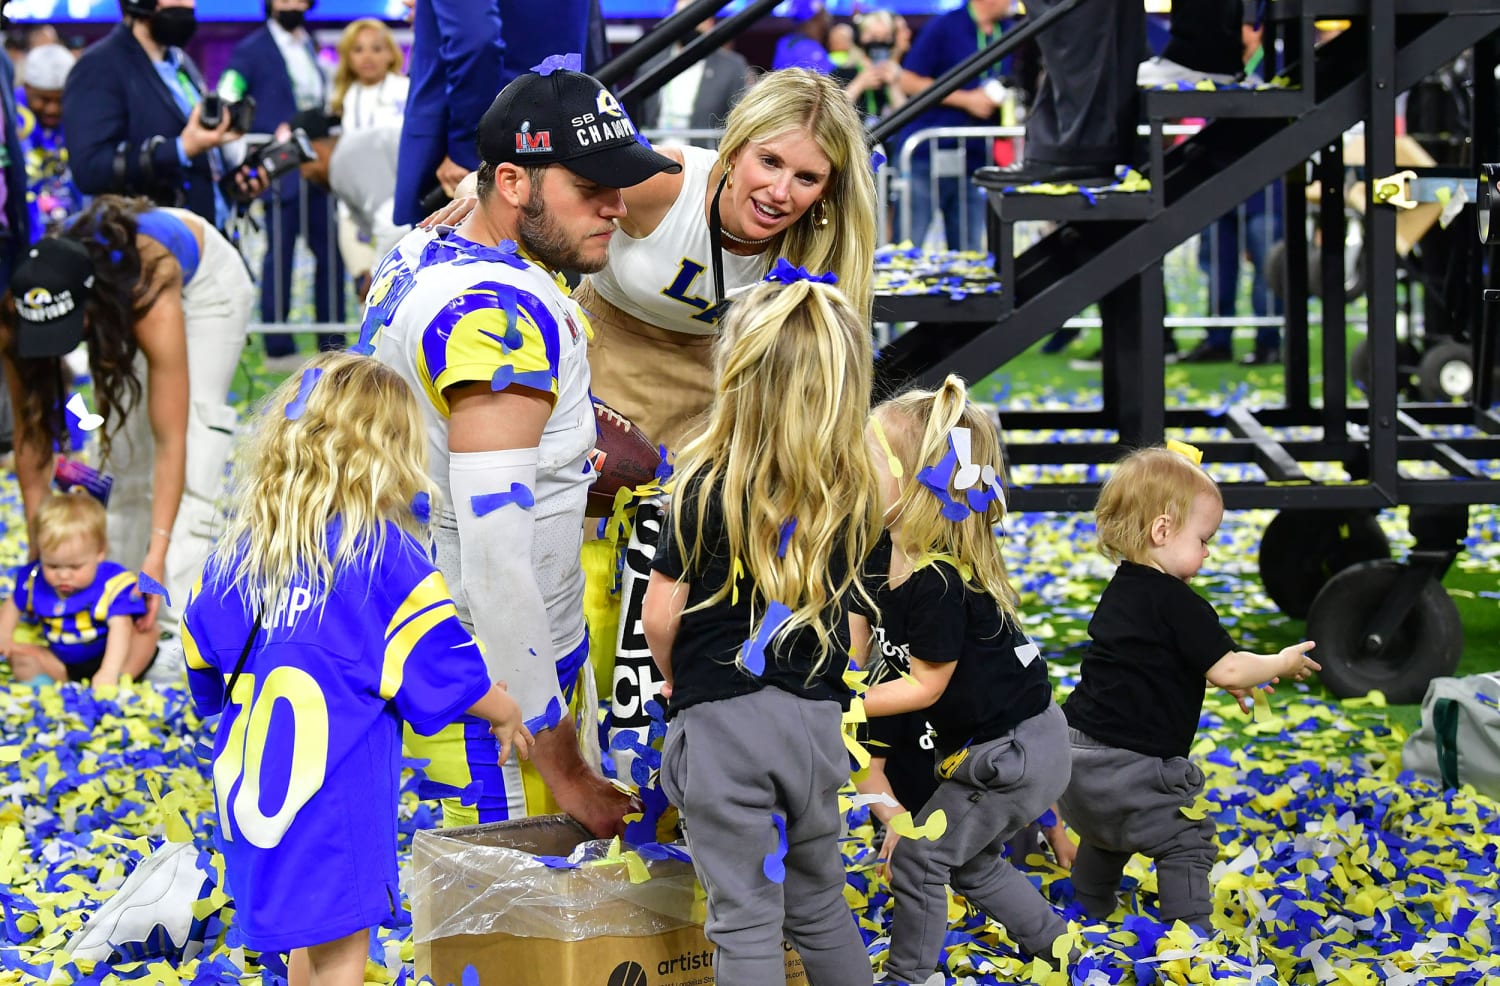 Kelly Stafford Praises Husband Matthew's Private Life as a Girl Dad